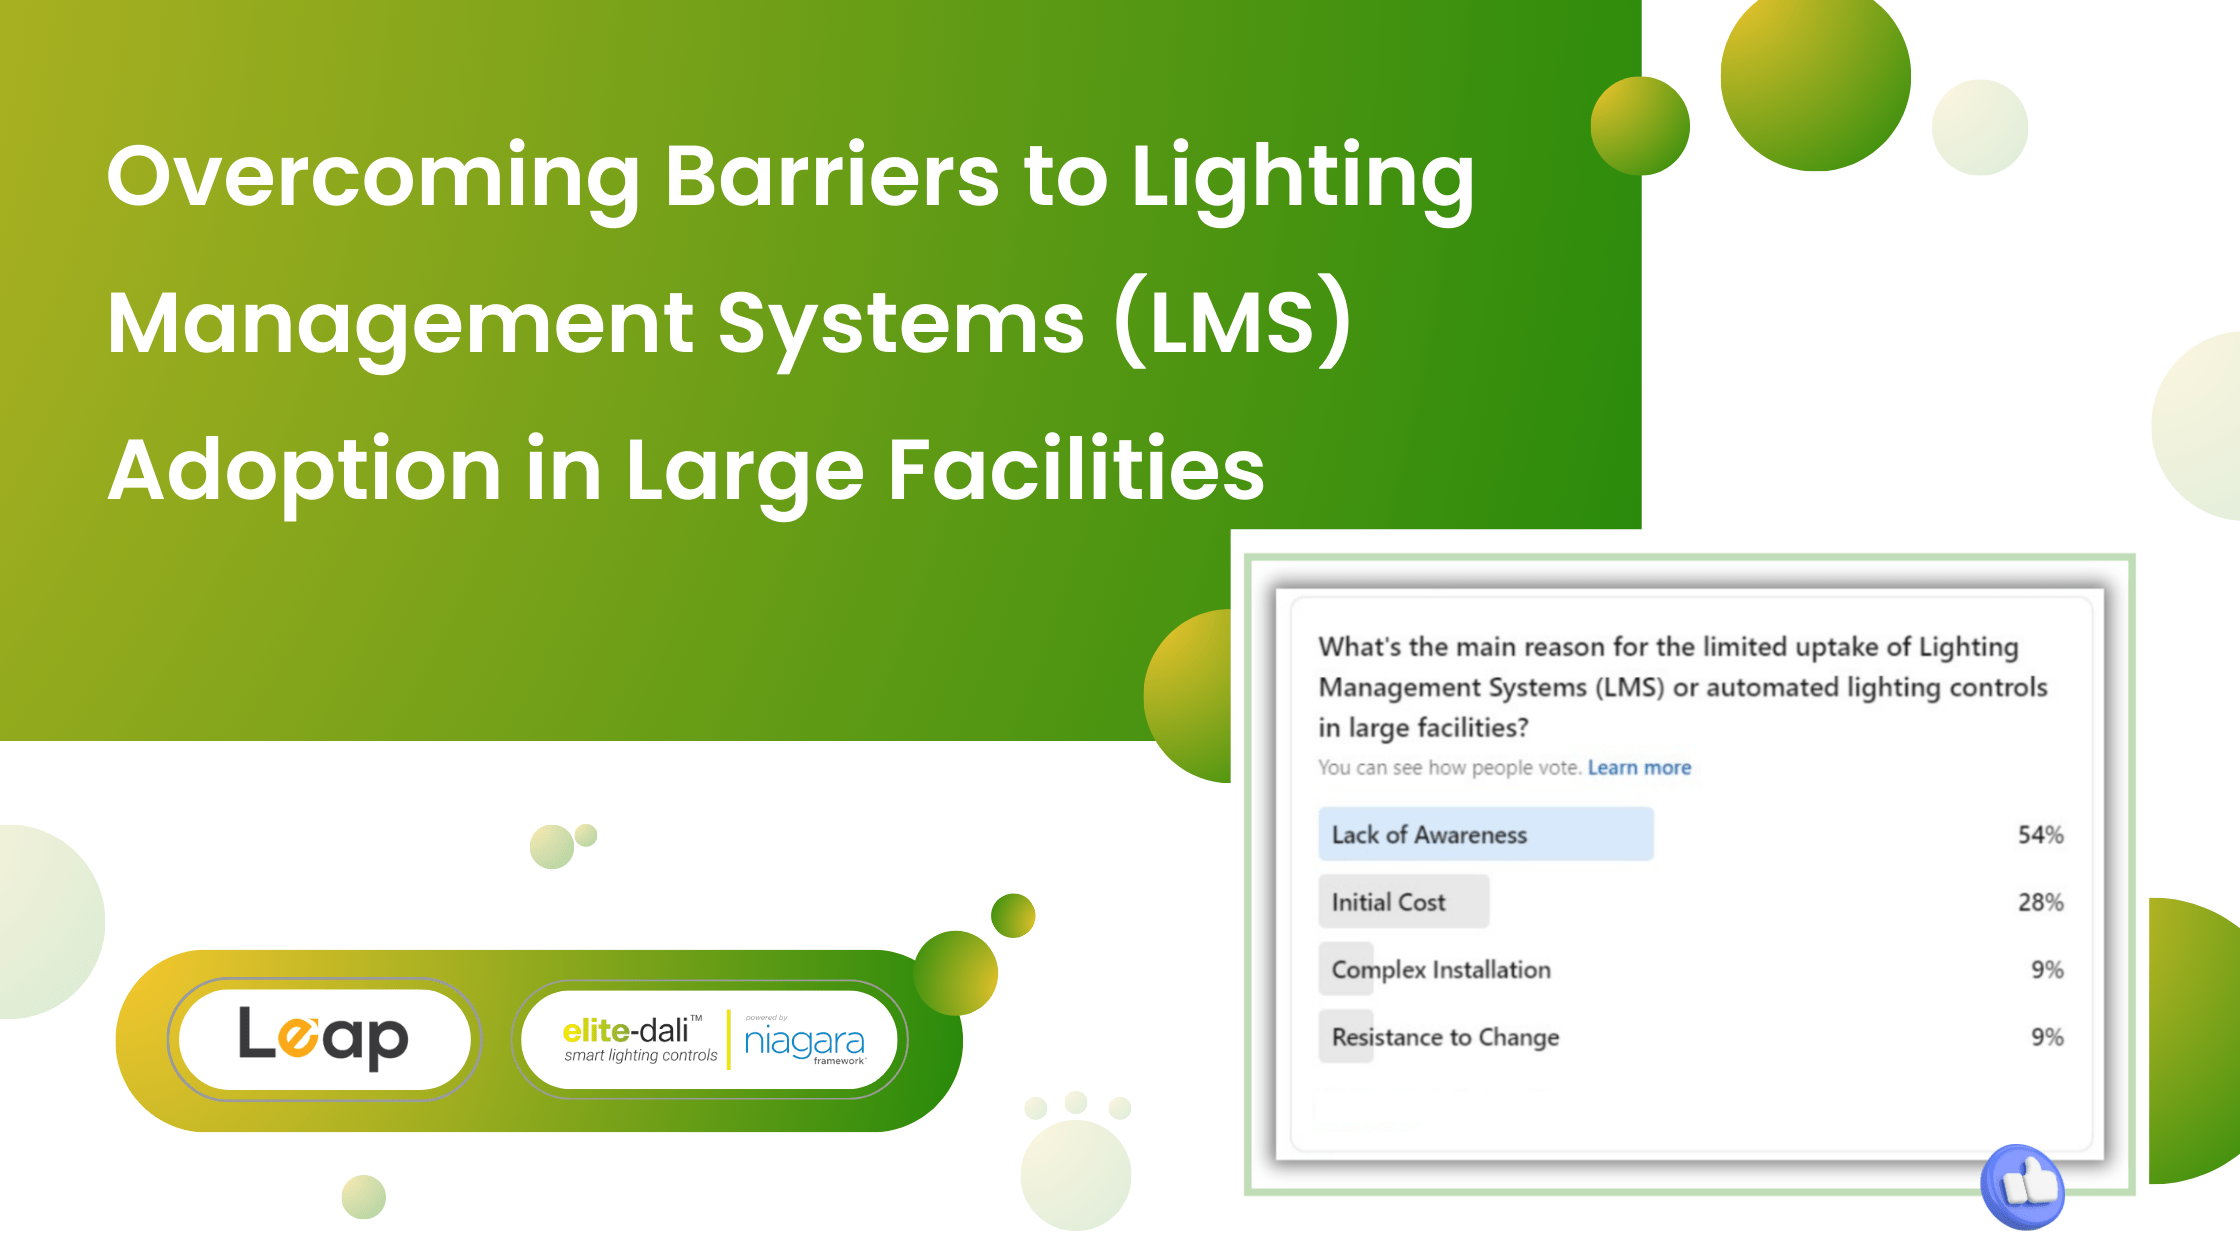 Overcoming Barriers to Lighting Management Systems (LMS) Adoption in Large Facilities.